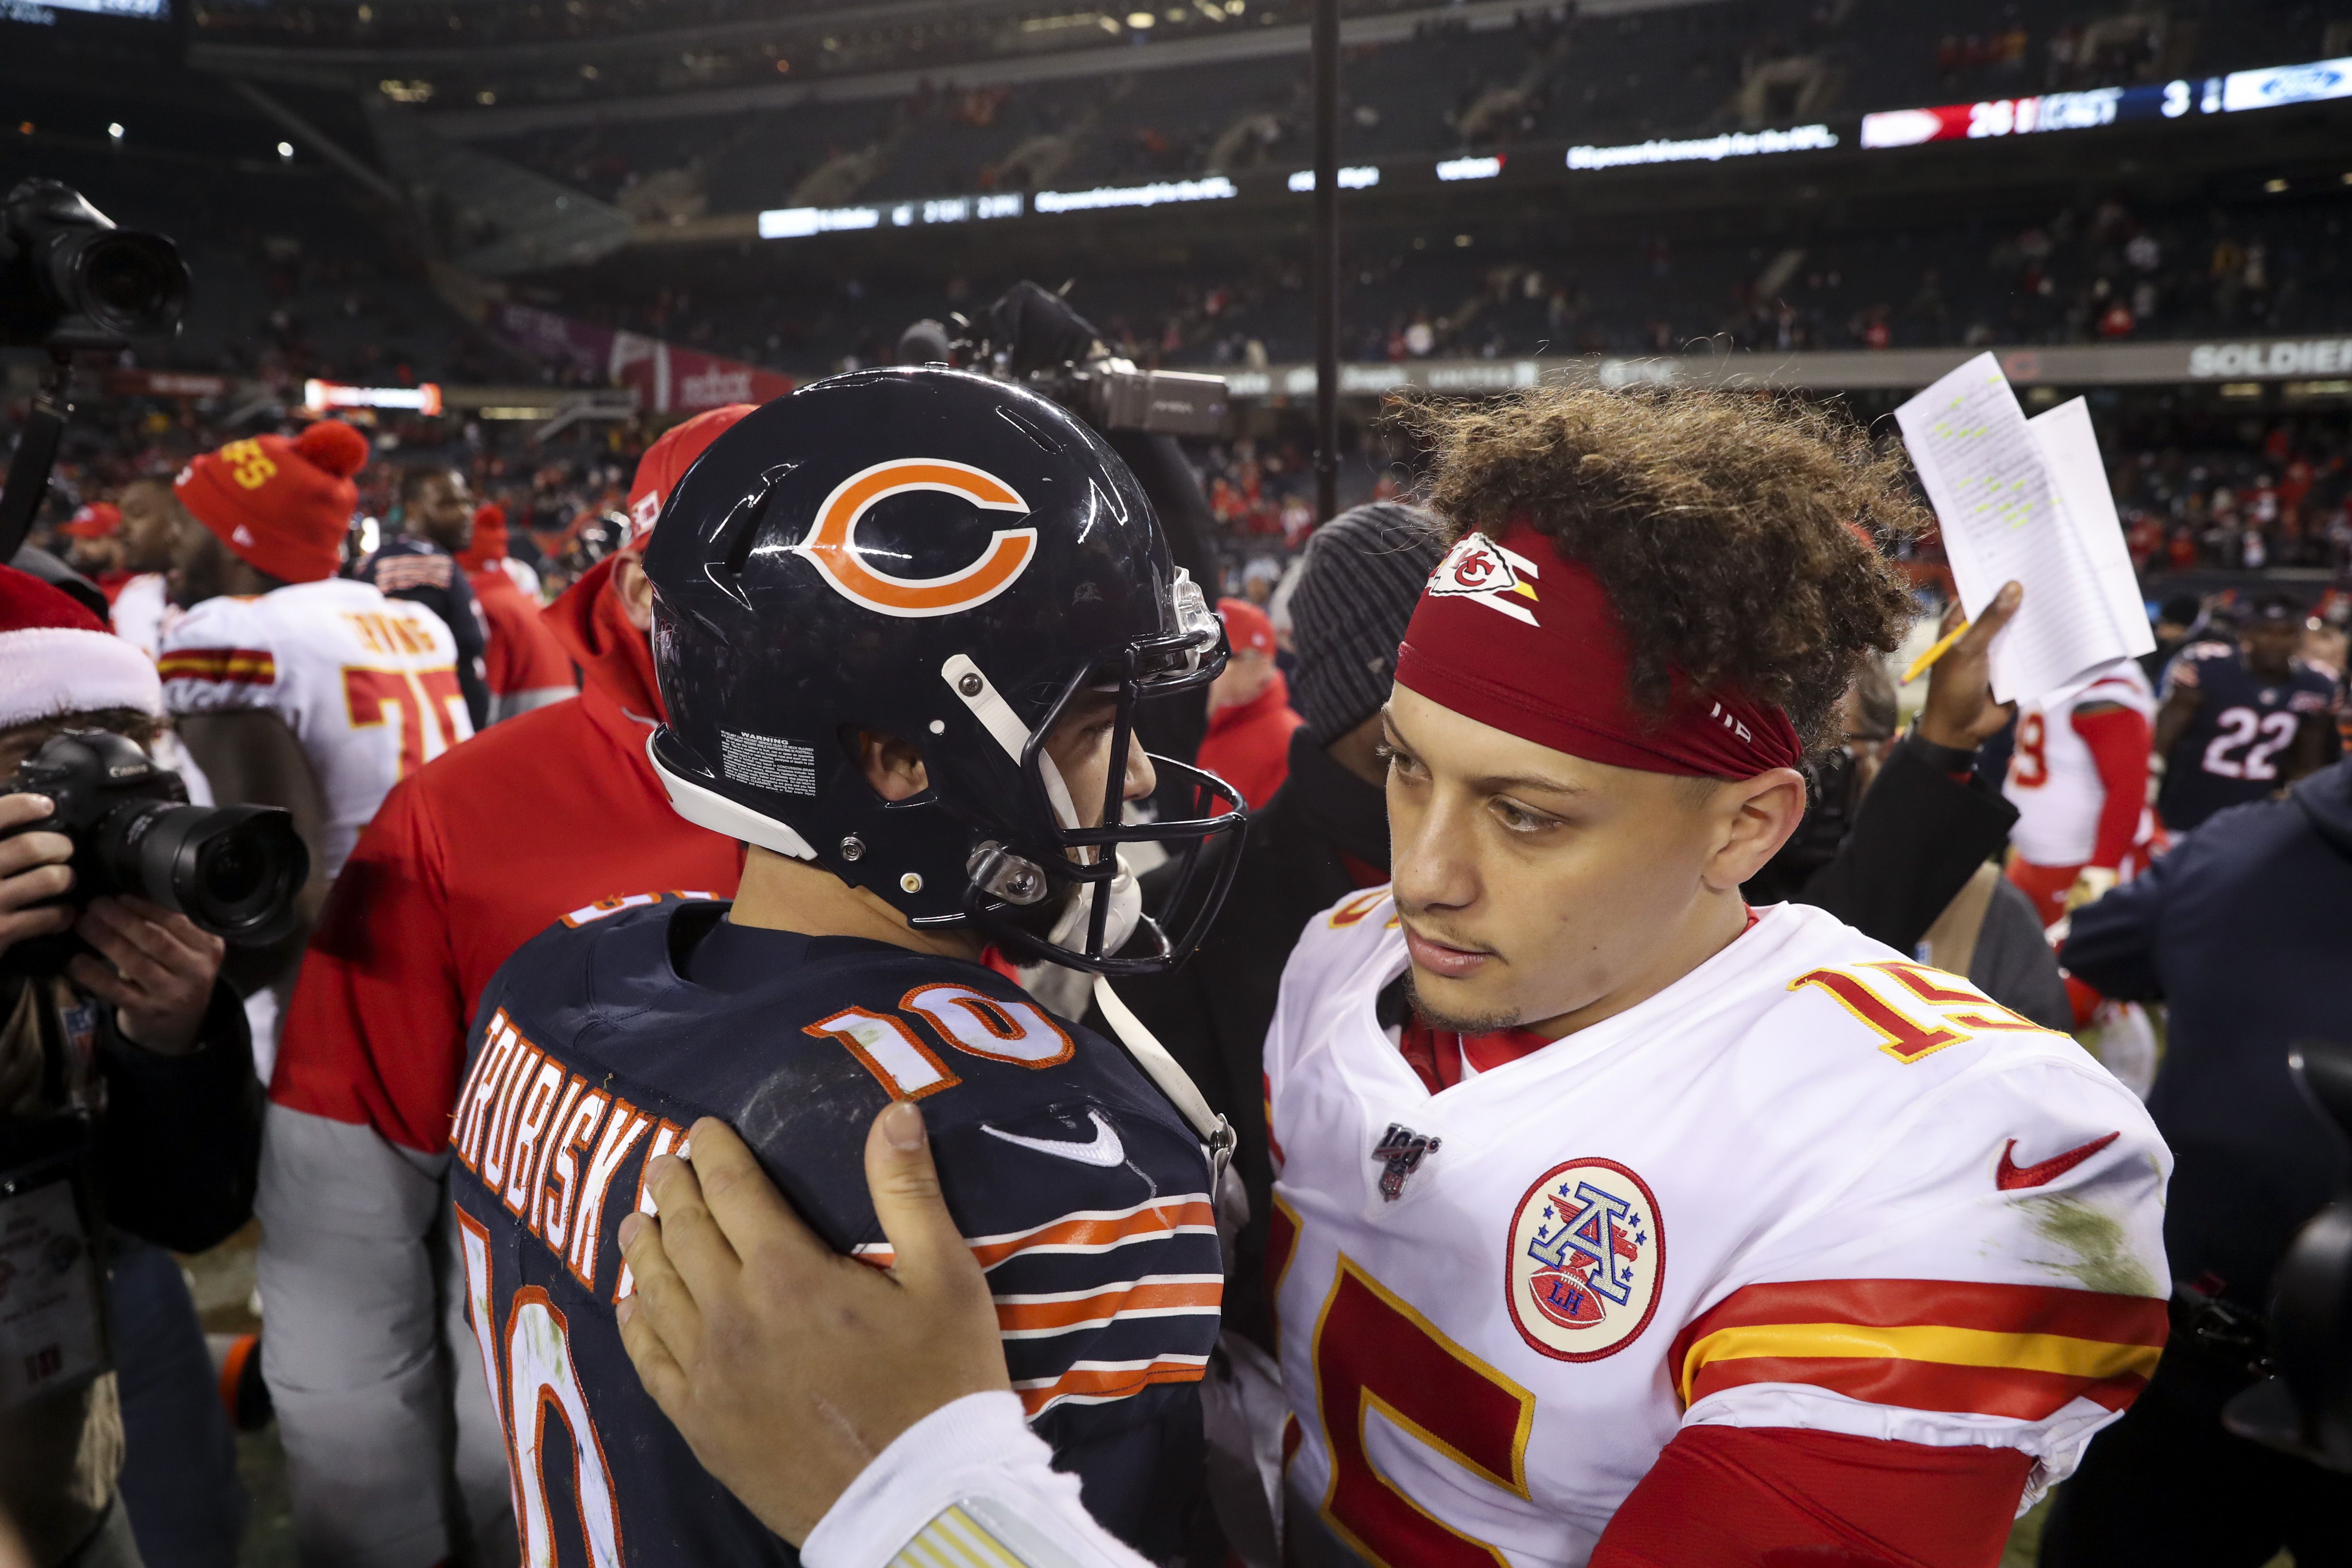 Bears Fan's Patrick Mahomes Jersey Was Perfect Symbol for Sunday's